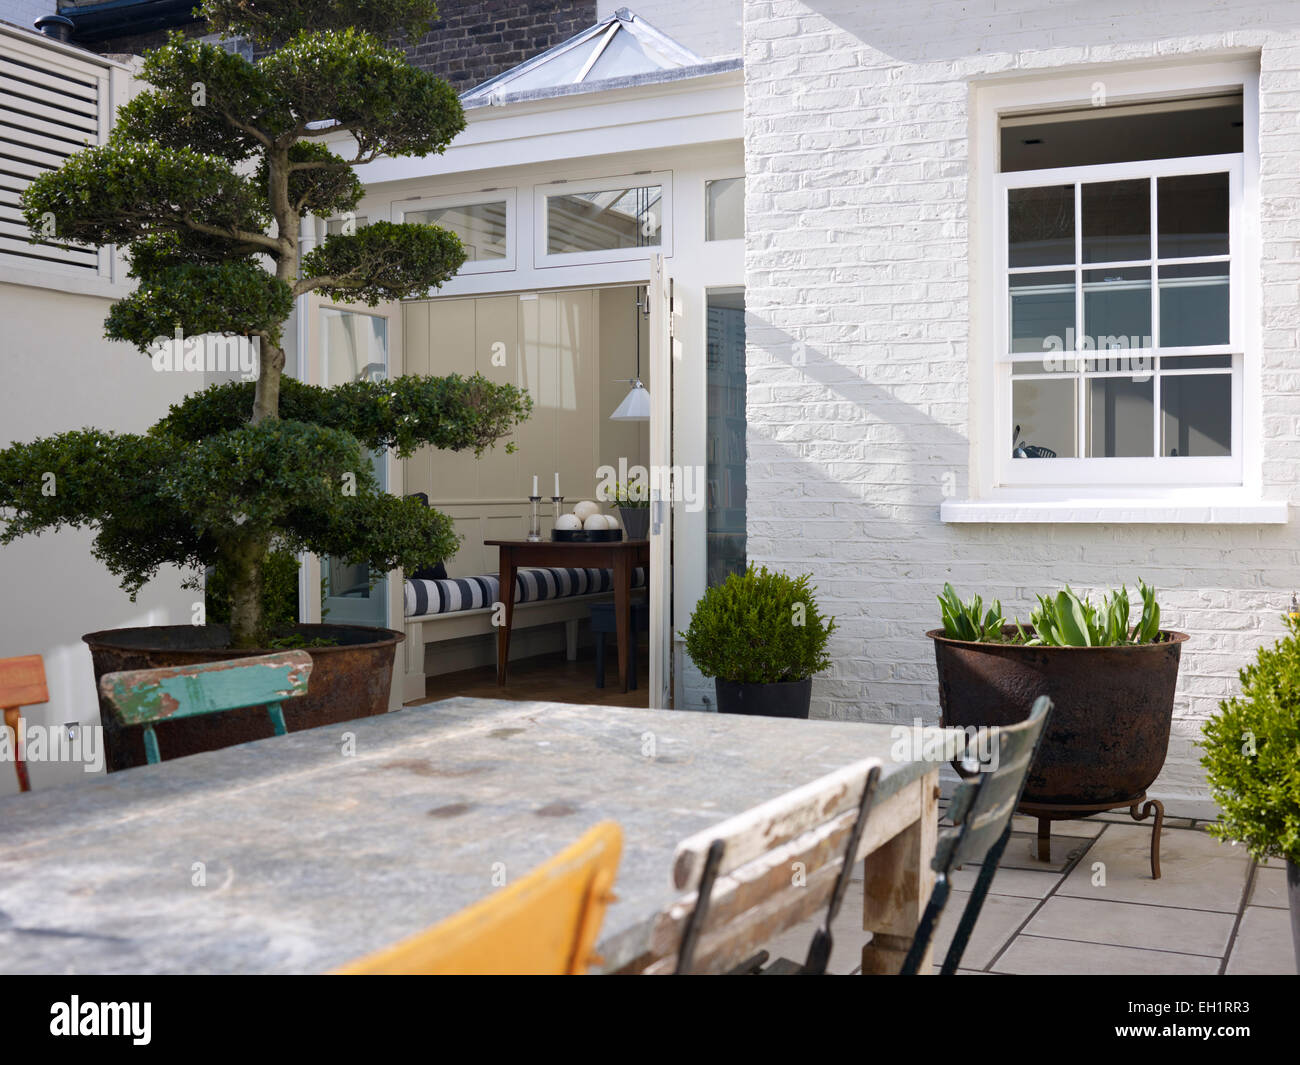 Tree in large plant pot, zinc-topped outdoor dining table and vintage metal chairs in paved back yard of residential house, Burlington Road, London, England, UK Stock Photo